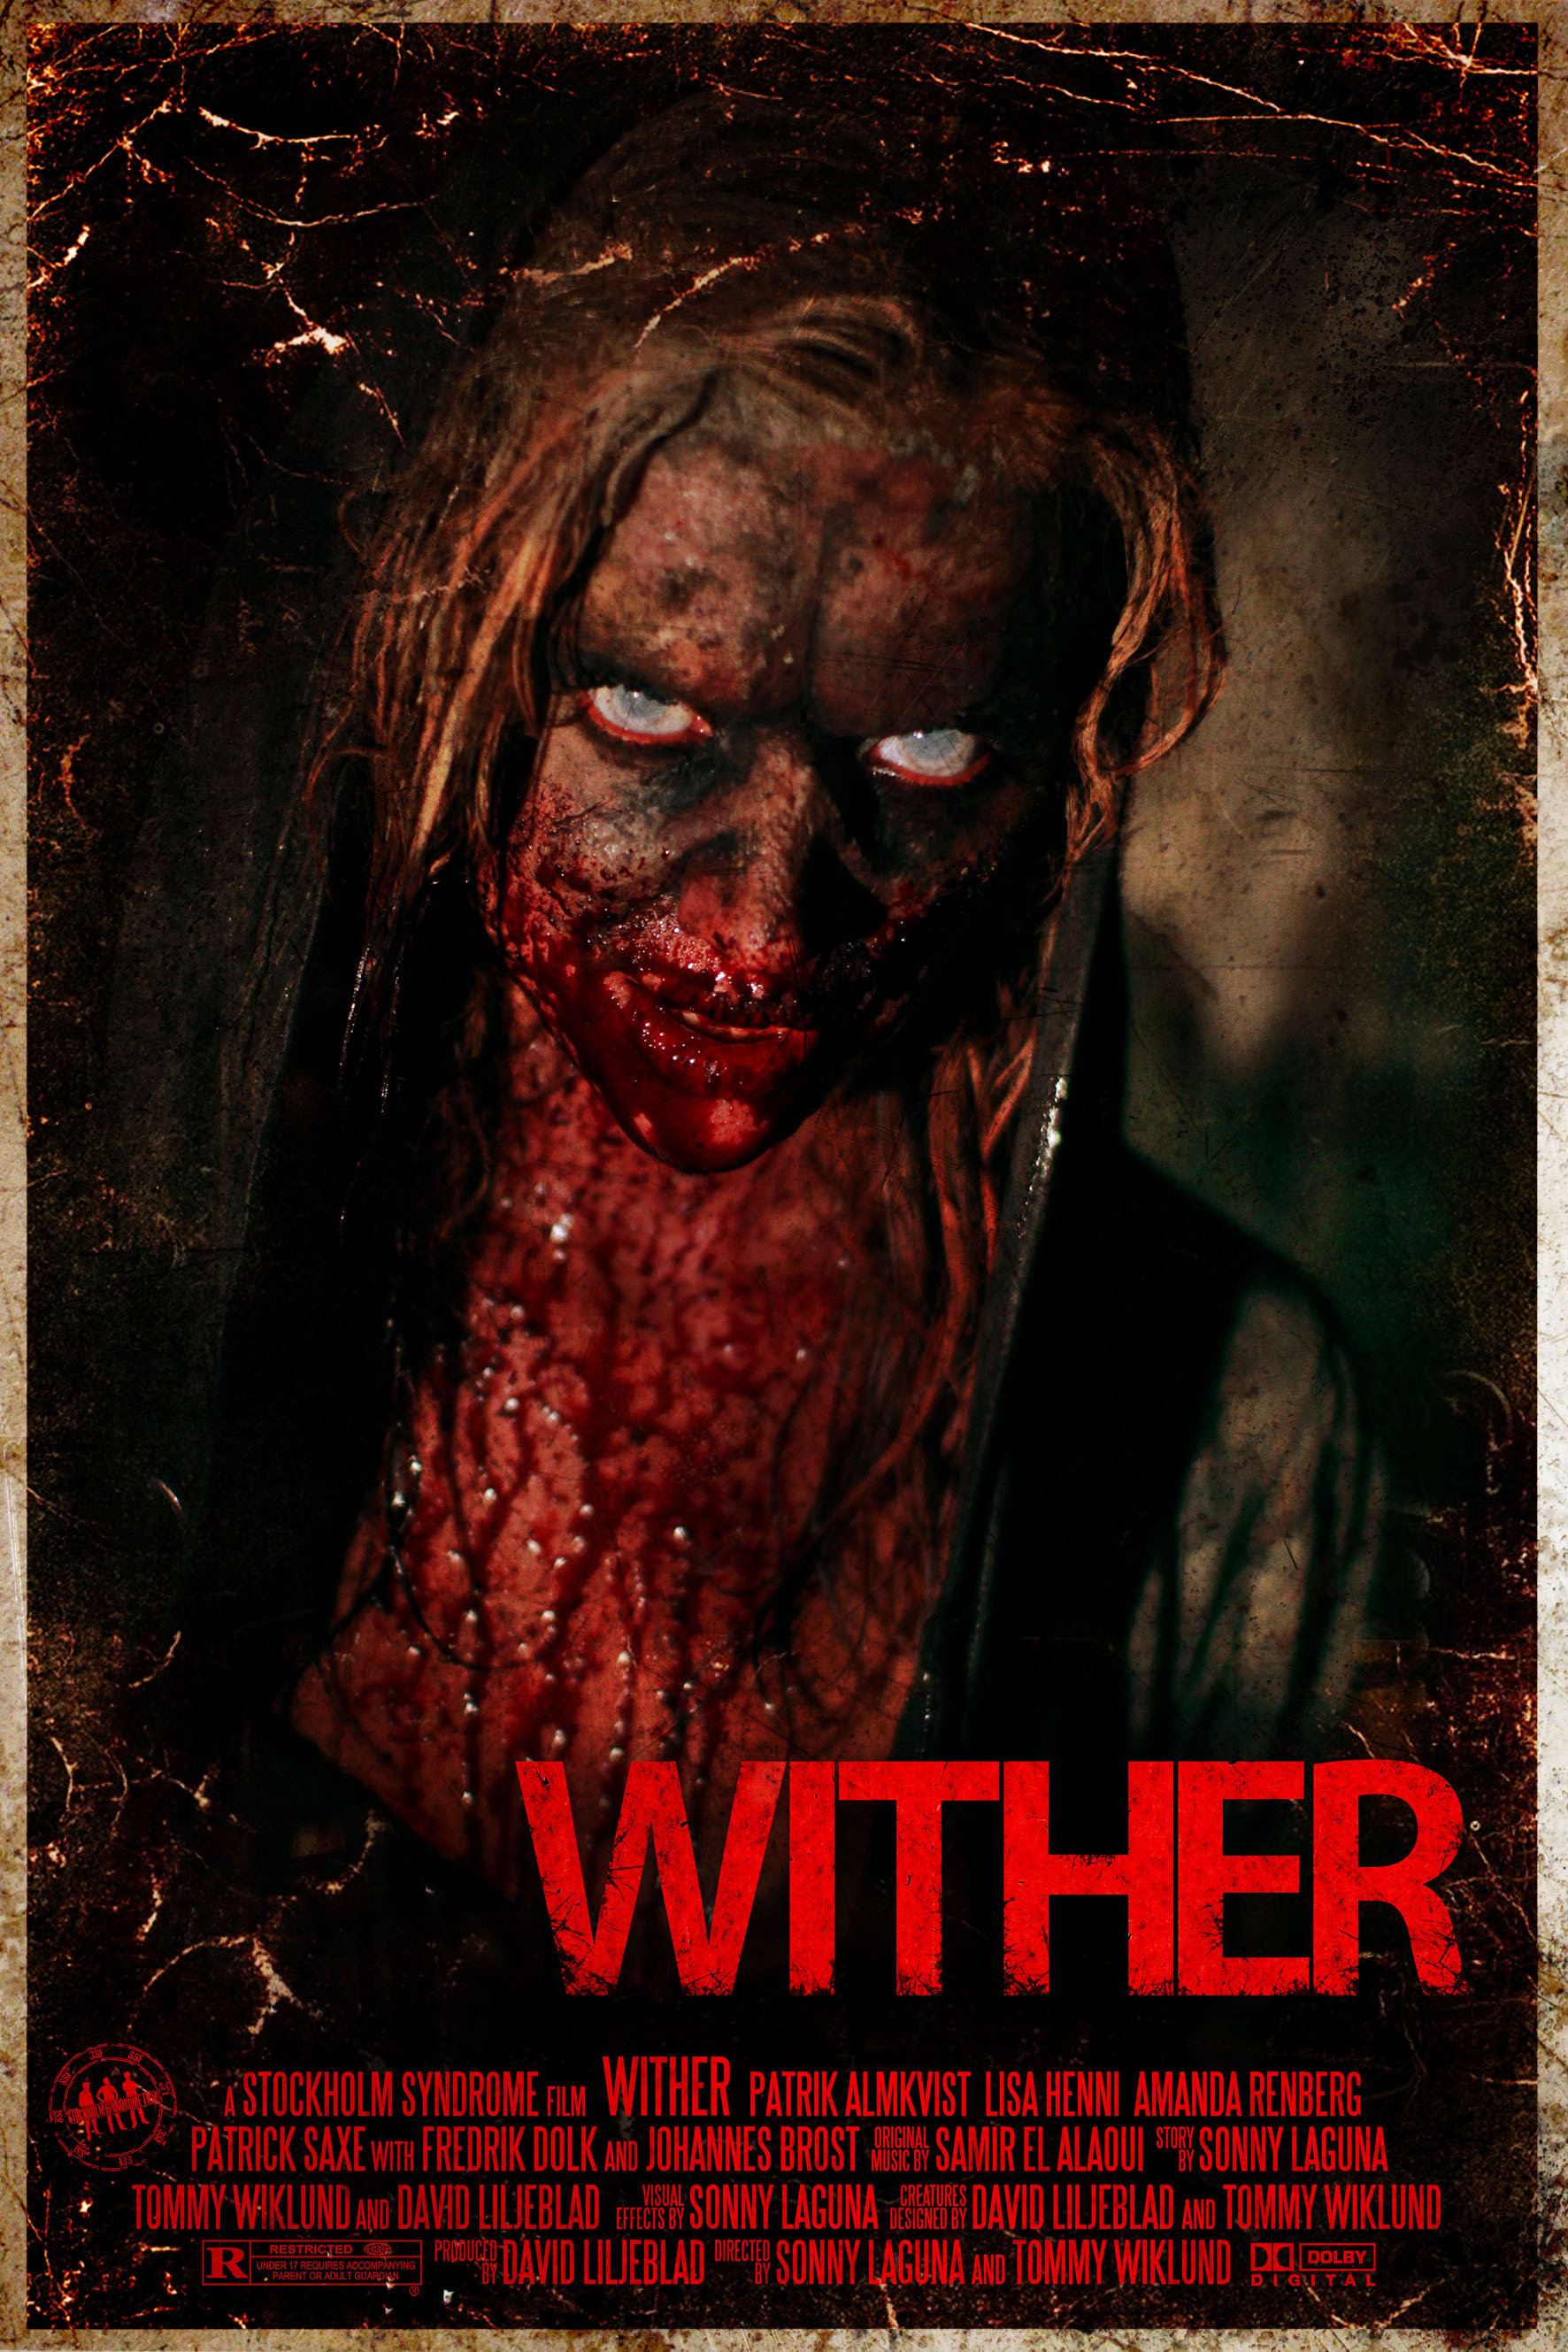 Wither (2012) Screenshot 1